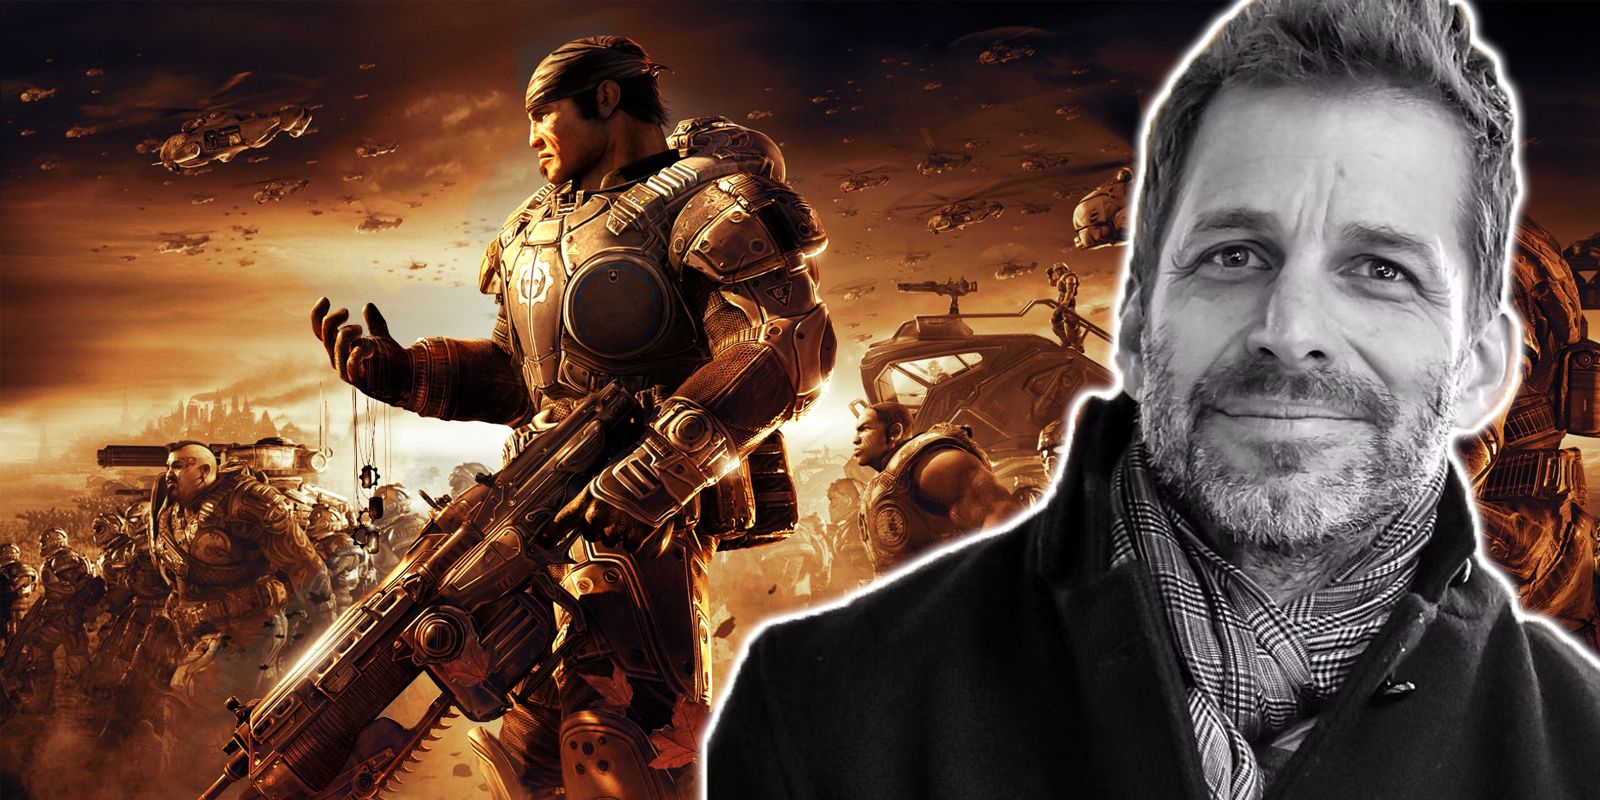 Gears of War game background overlaid with Zack Snyder in black and white